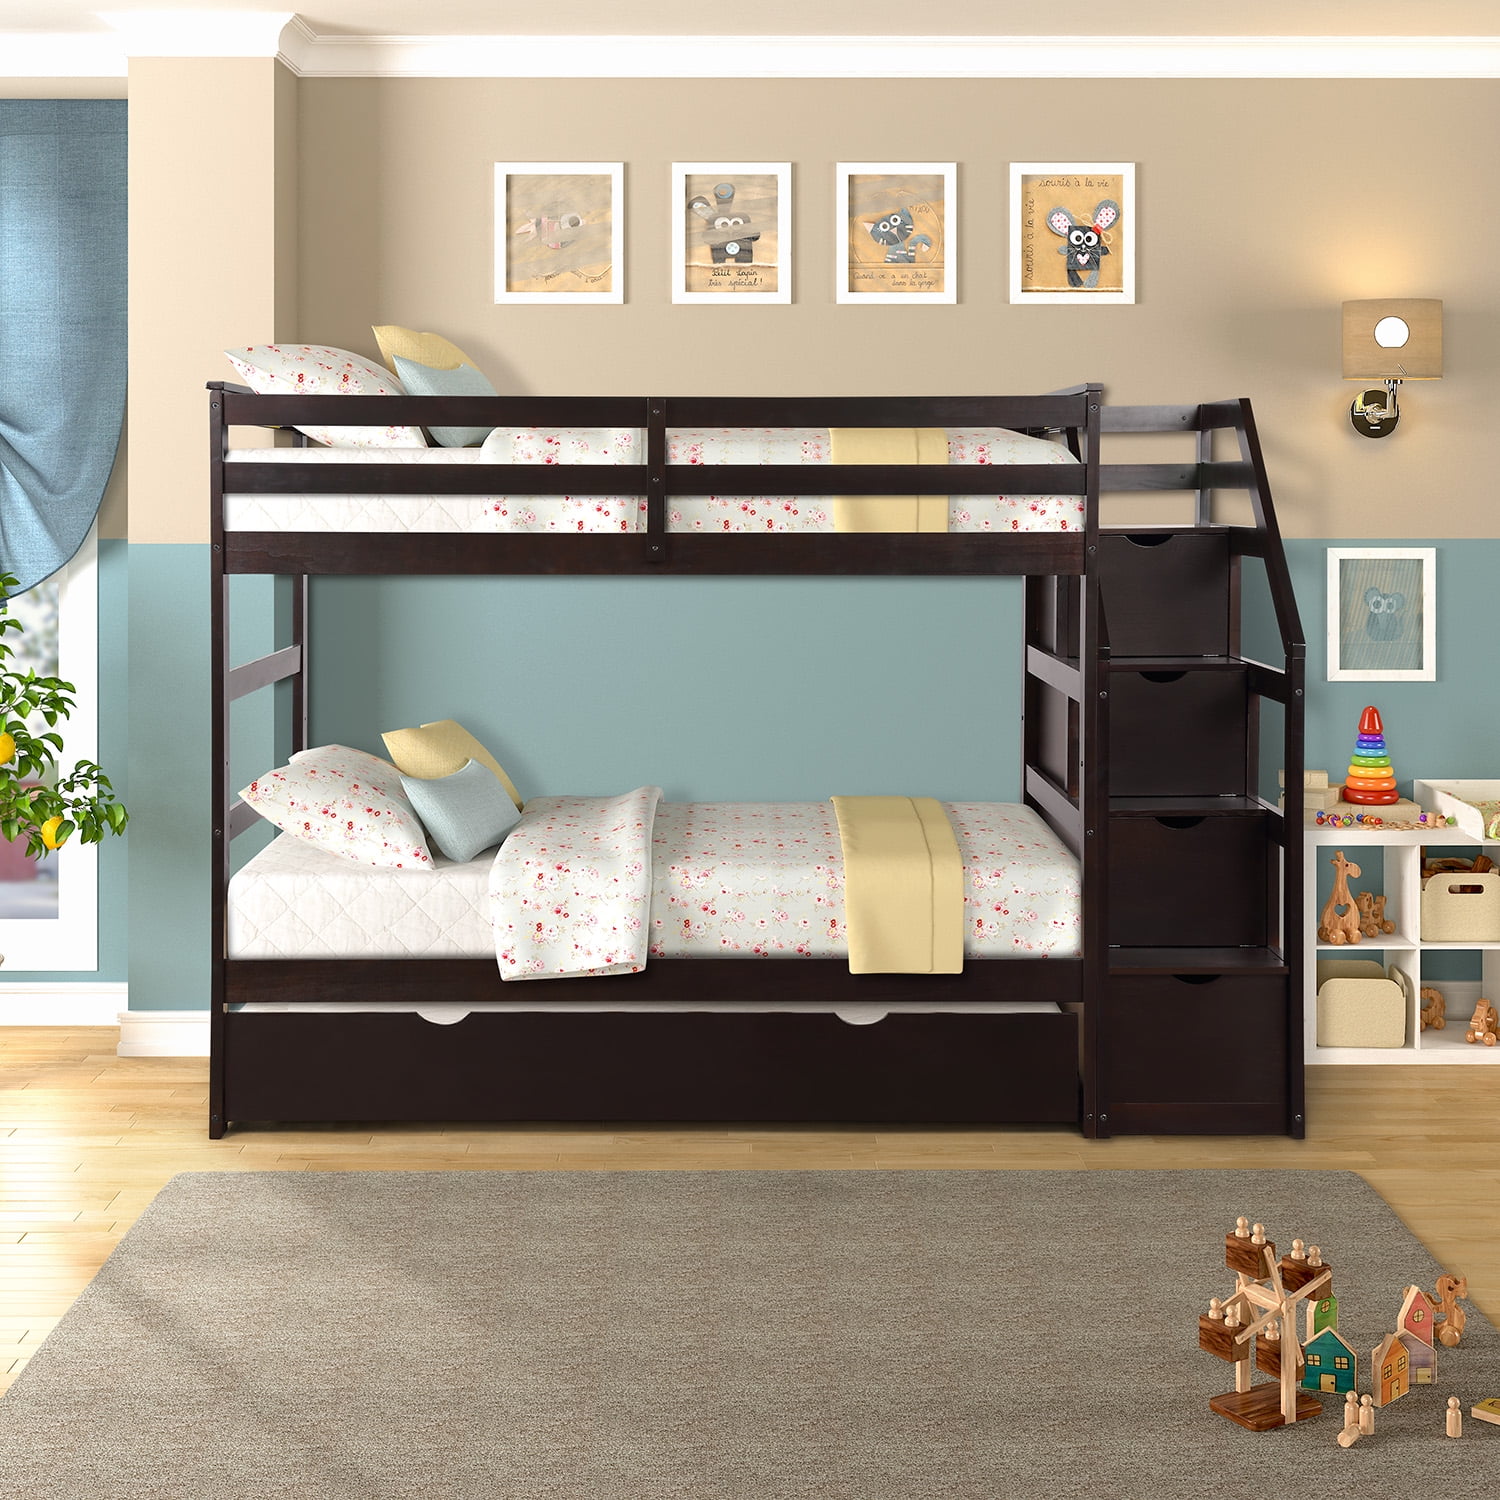 Safety Rail Roll Out Trundle W, Roll Out Bunk Beds